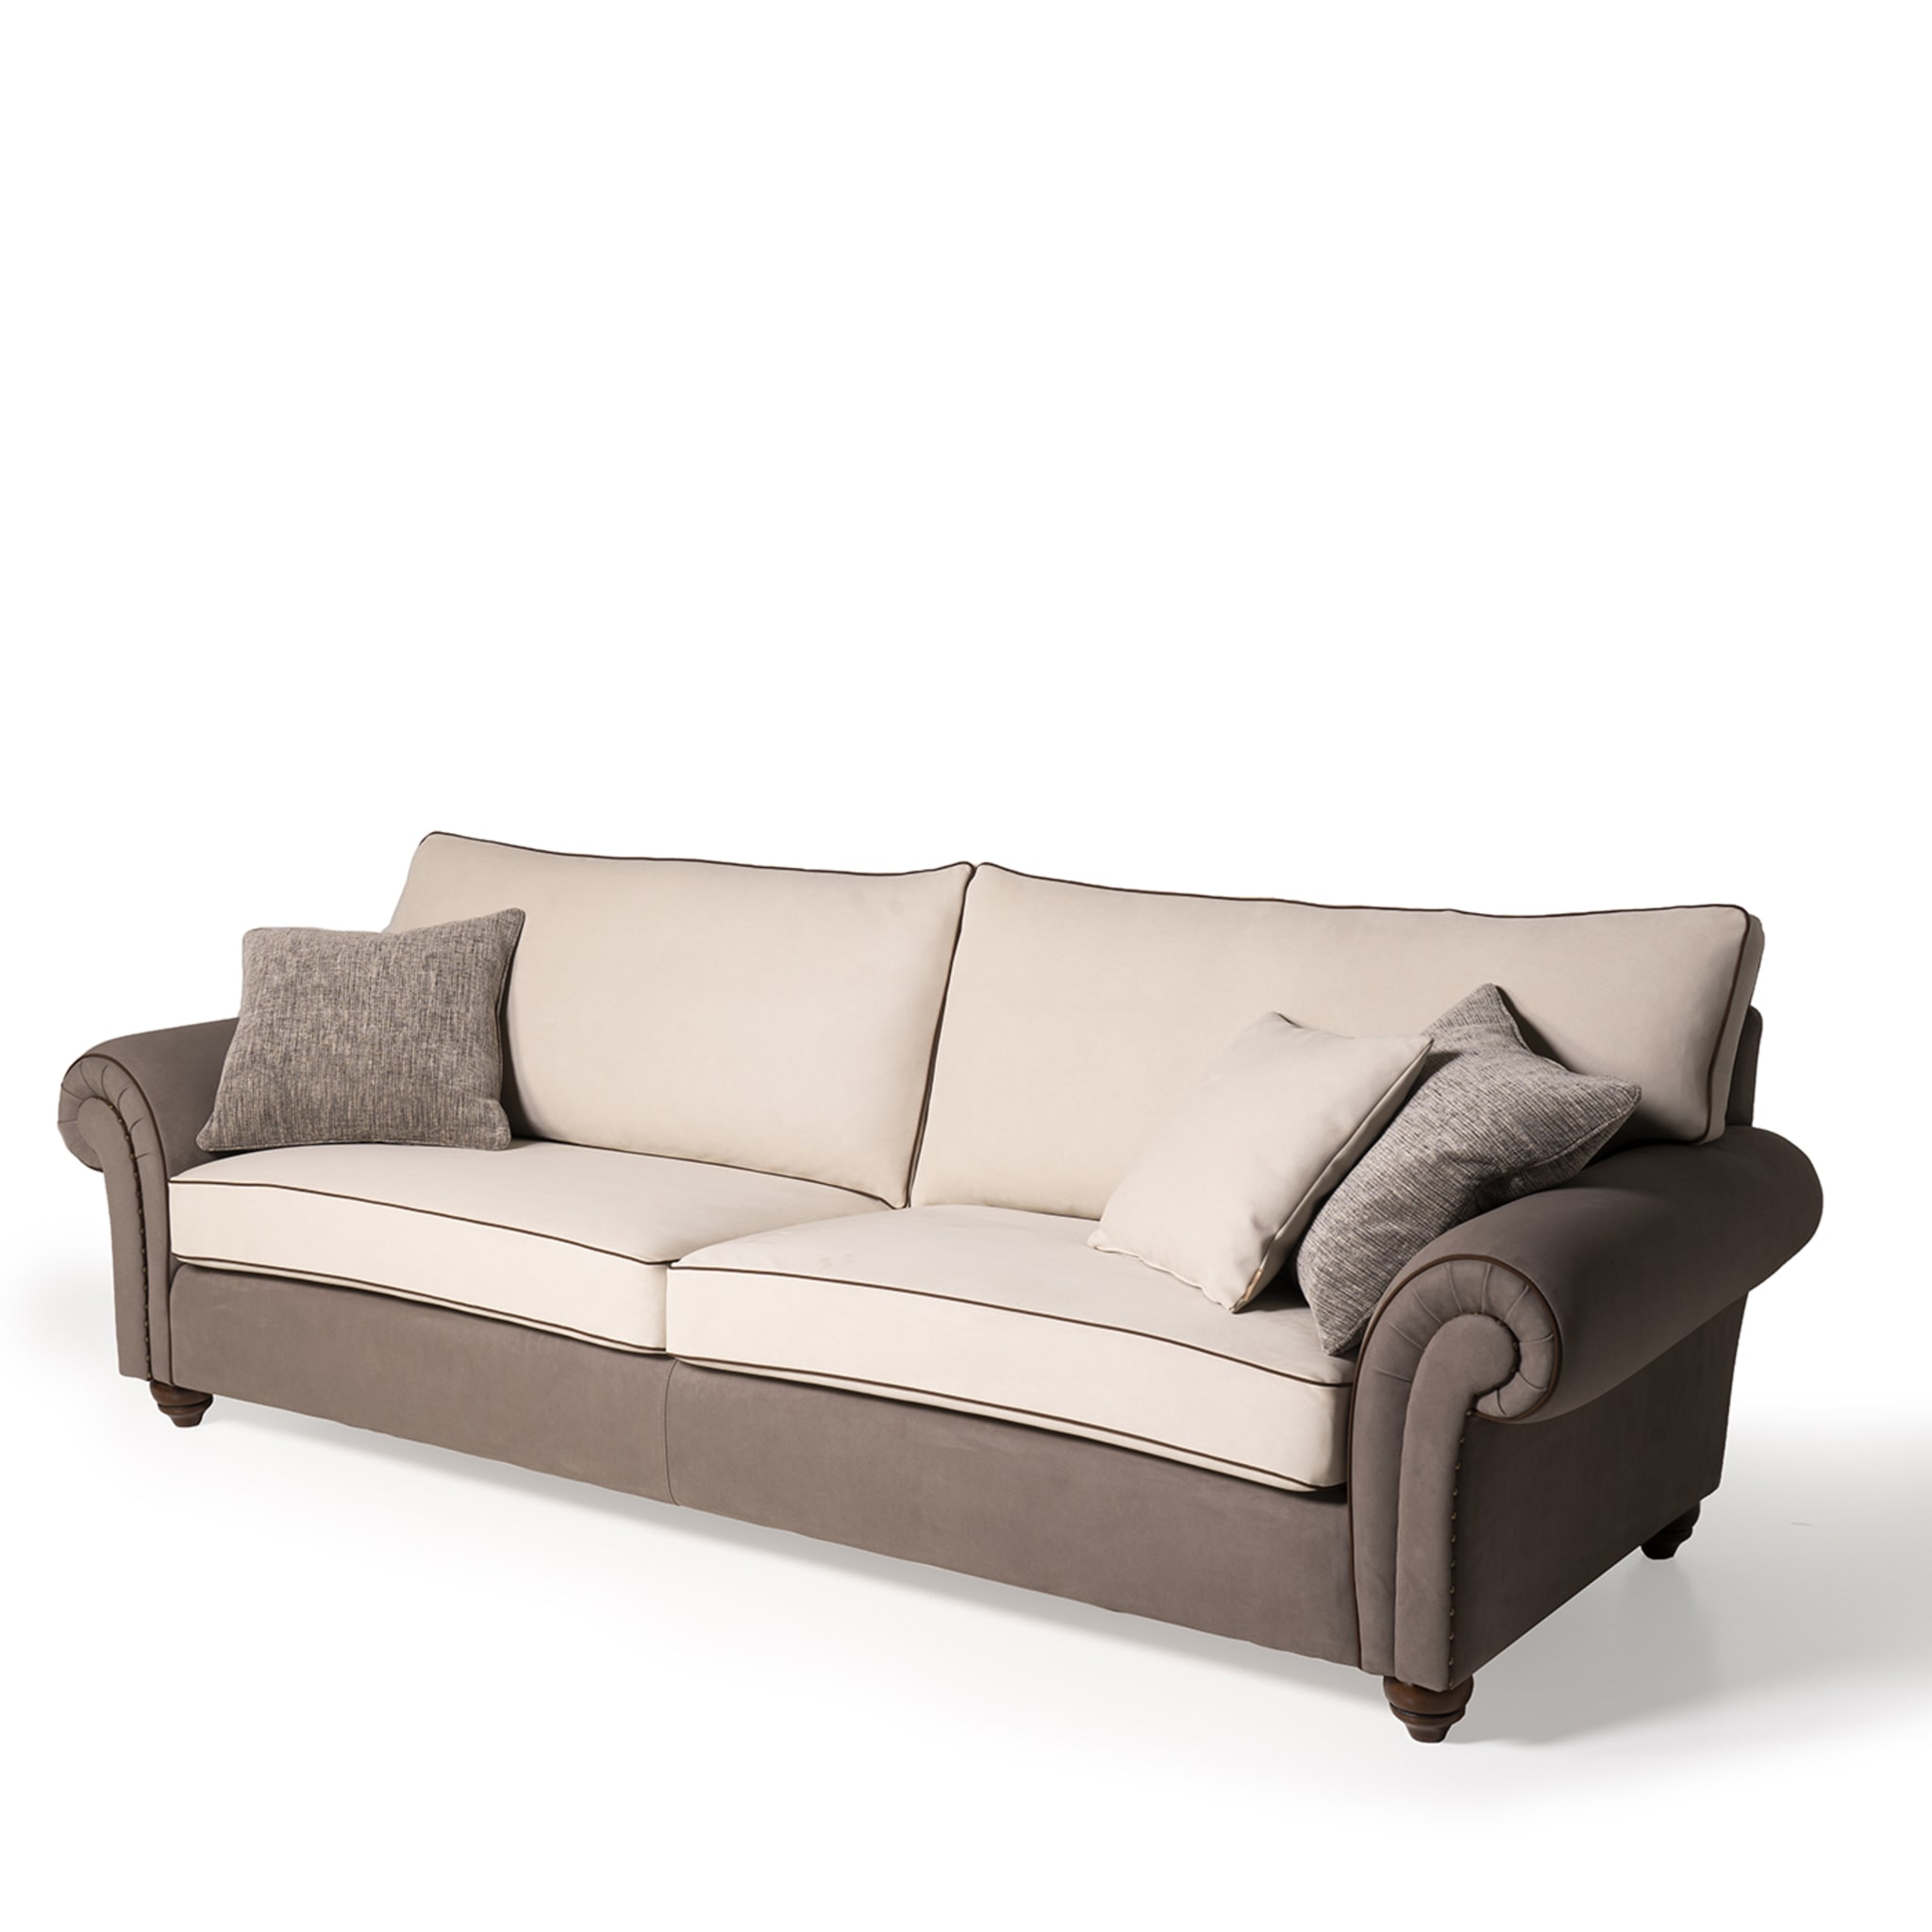 Borghese 3-Seater Sofa by Marco and Giulio Mantellassi - Alternative view 1